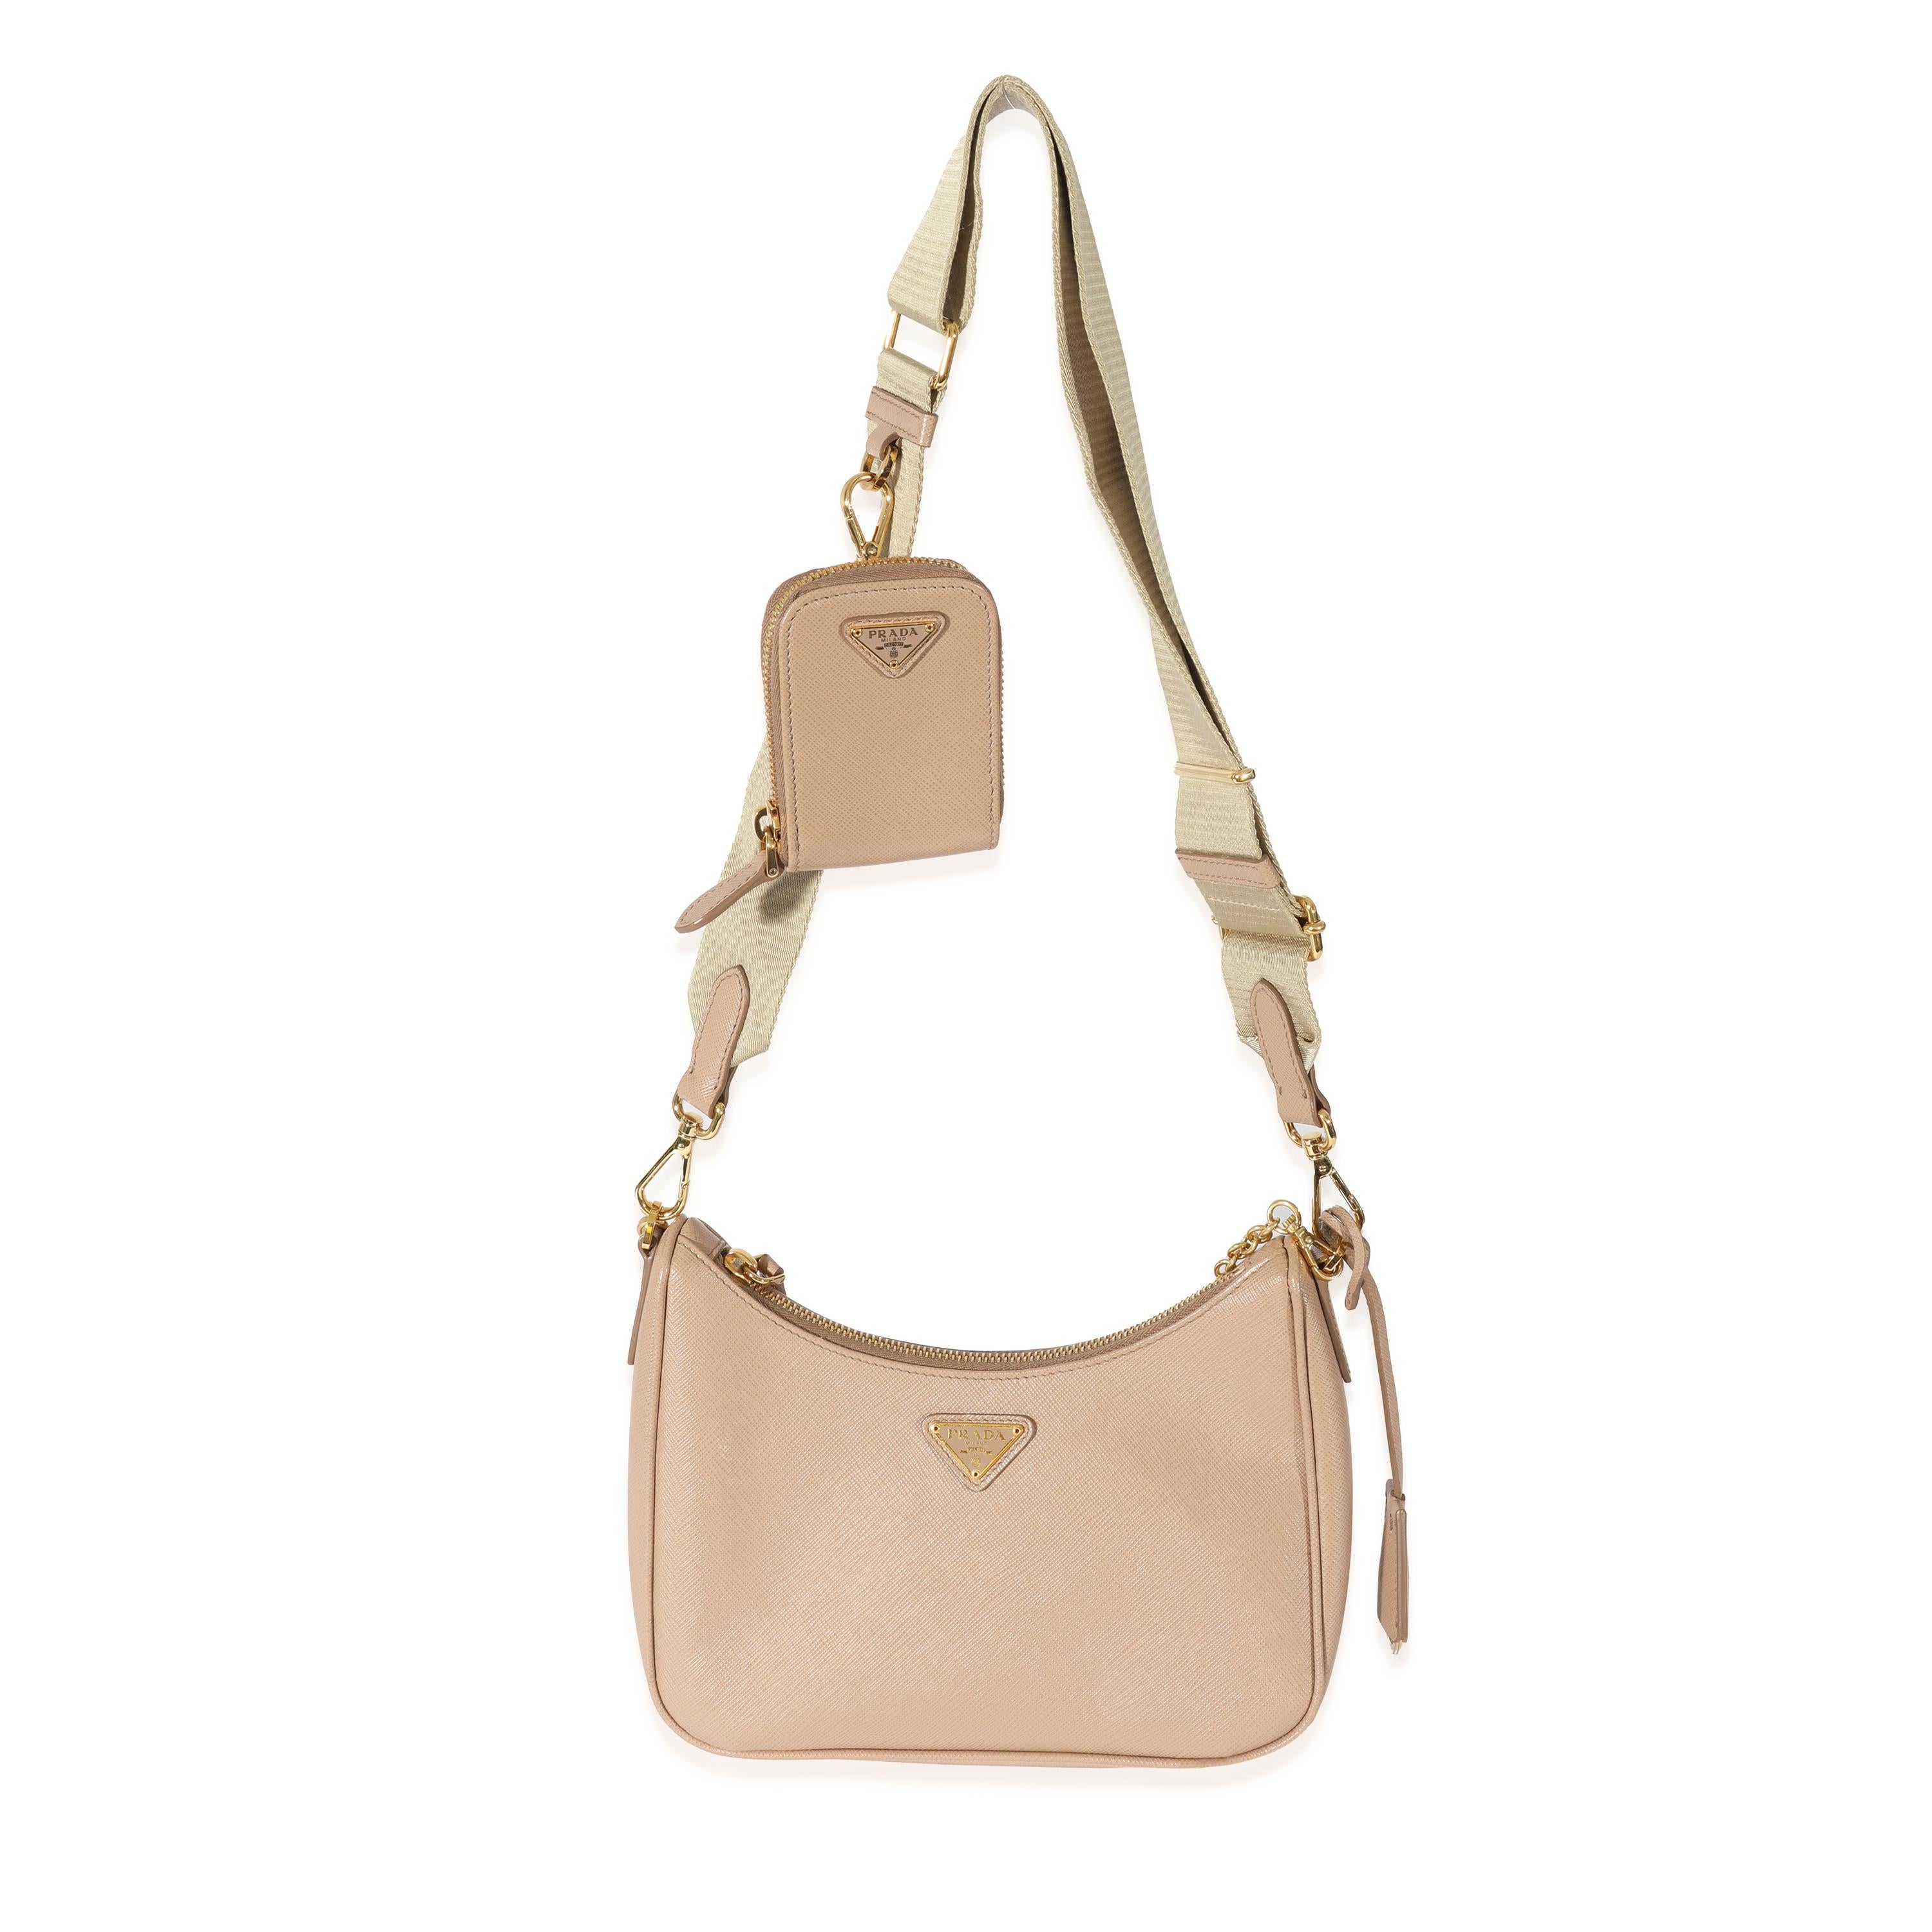 Listing Title: Prada Cameo Beige Saffiano Re-Edition 2005
 SKU: 128557
 MSRP: 2490.00
 Condition: Pre-owned 
 Handbag Condition: Very Good
 Condition Comments: Very Good Condition. Creasing and light scuffing to leather. Scratching to hardware.
